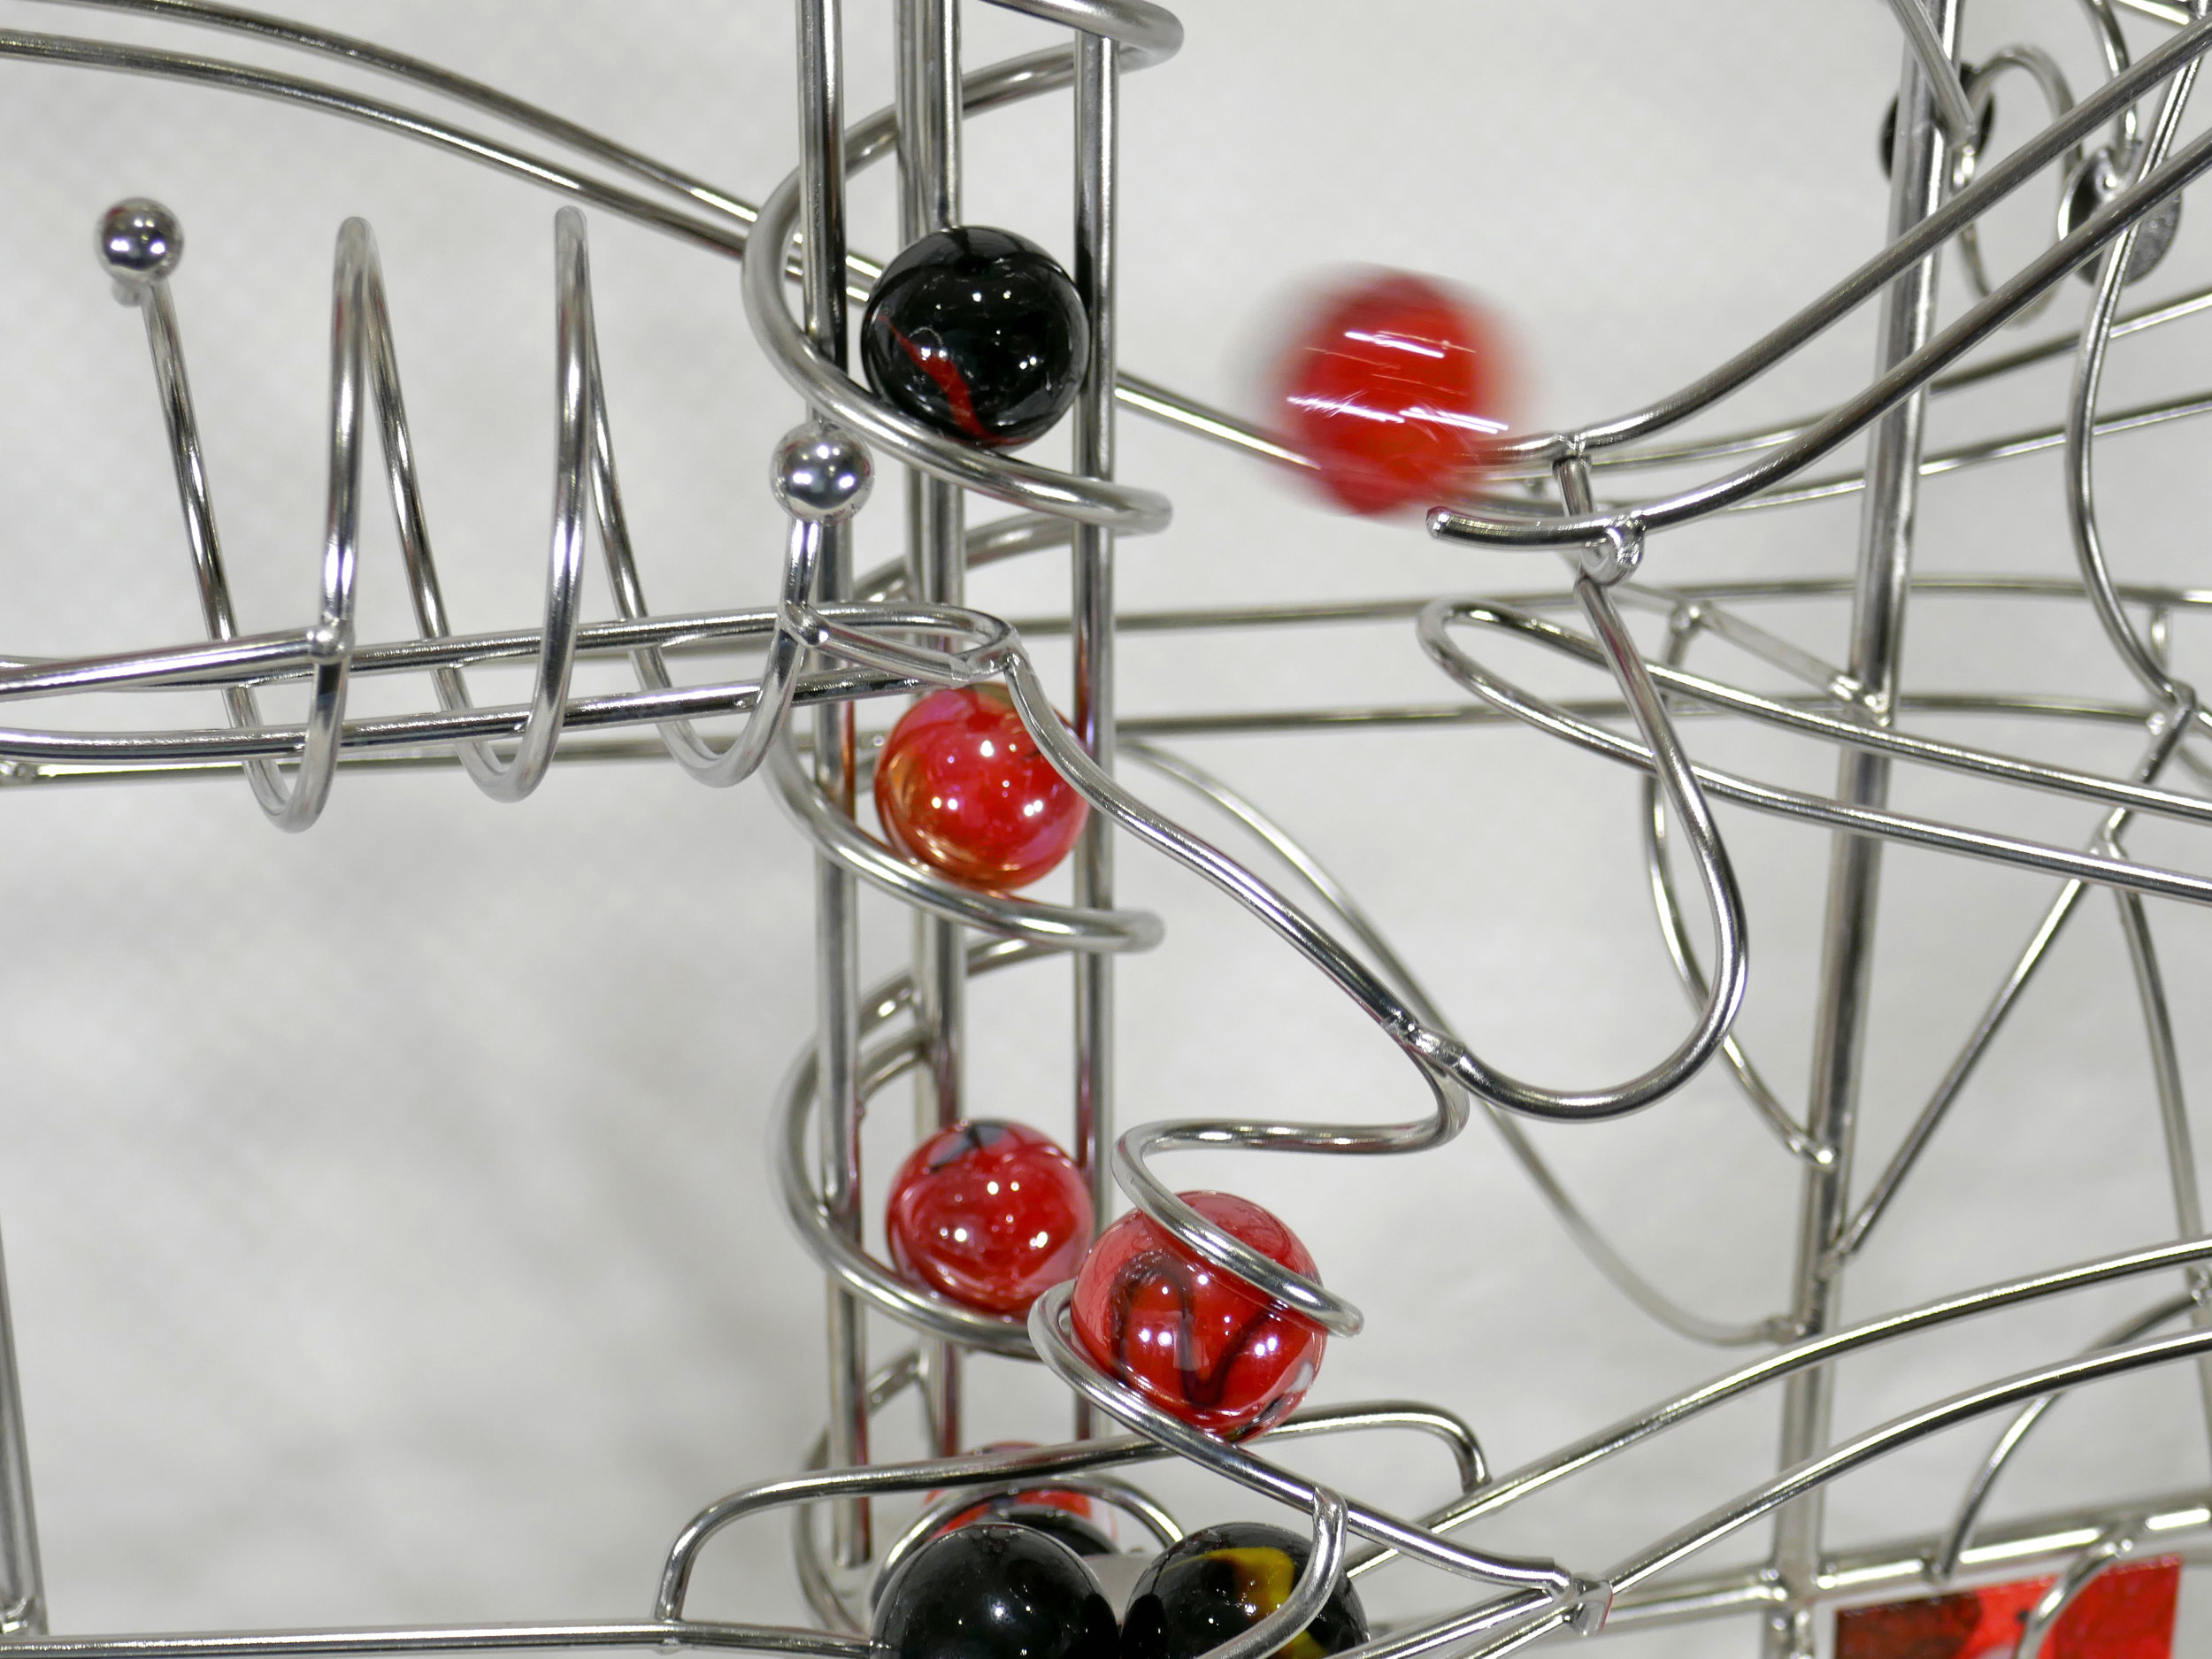 Rolling ball marble machines - action shot showing marbles travelling along the rails